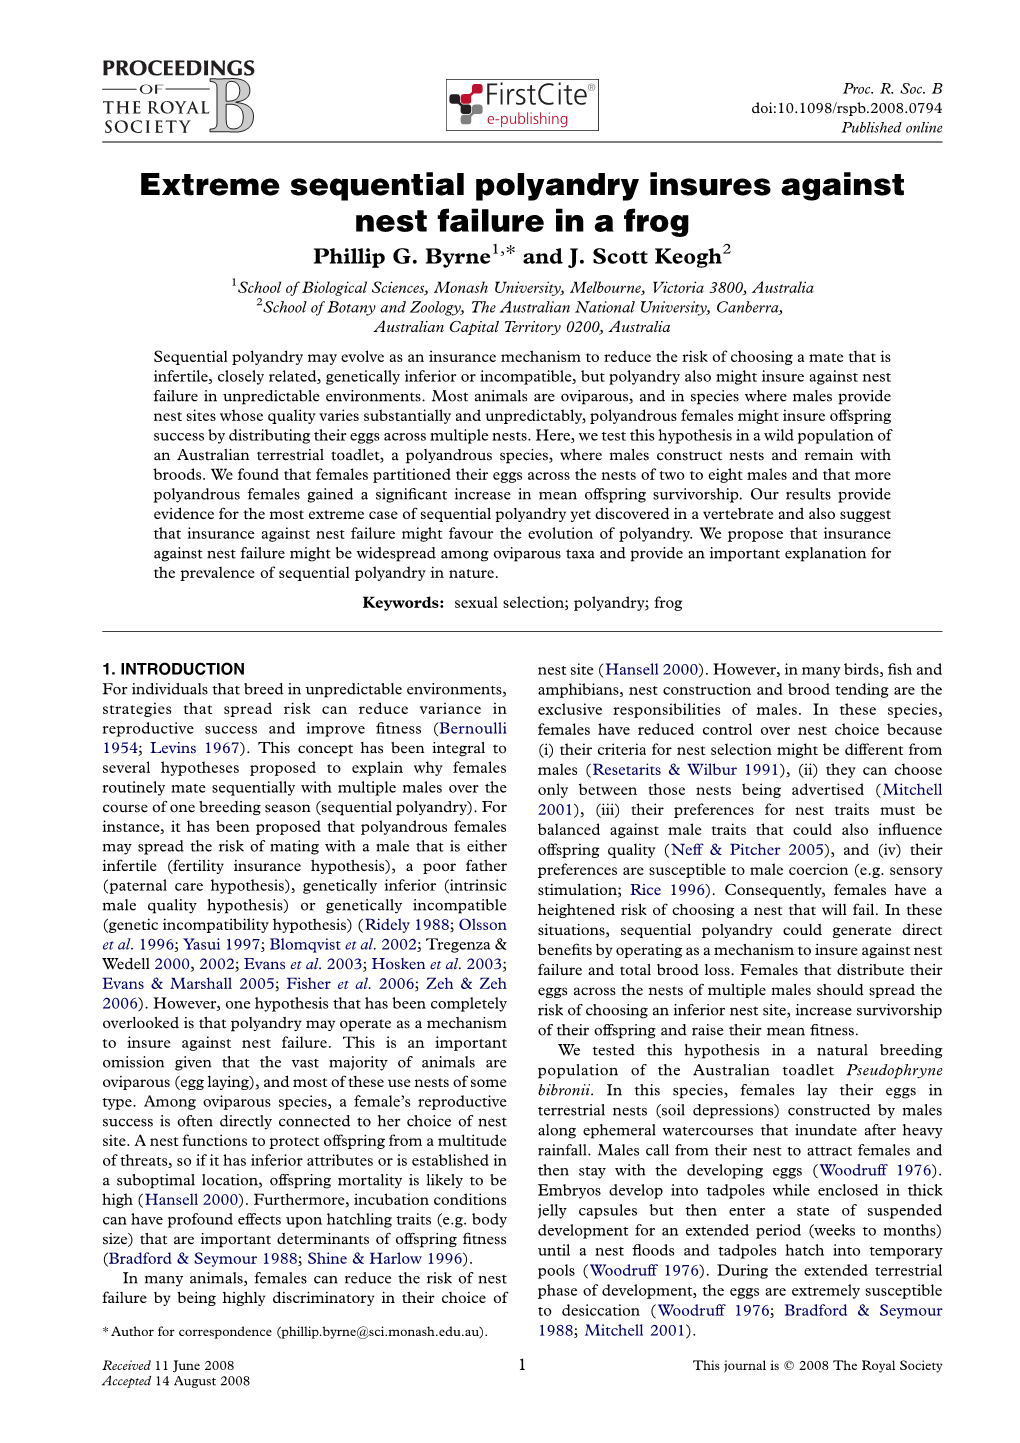 Extreme Sequential Polyandry Insures Against Nest Failure in a Frog Phillip G